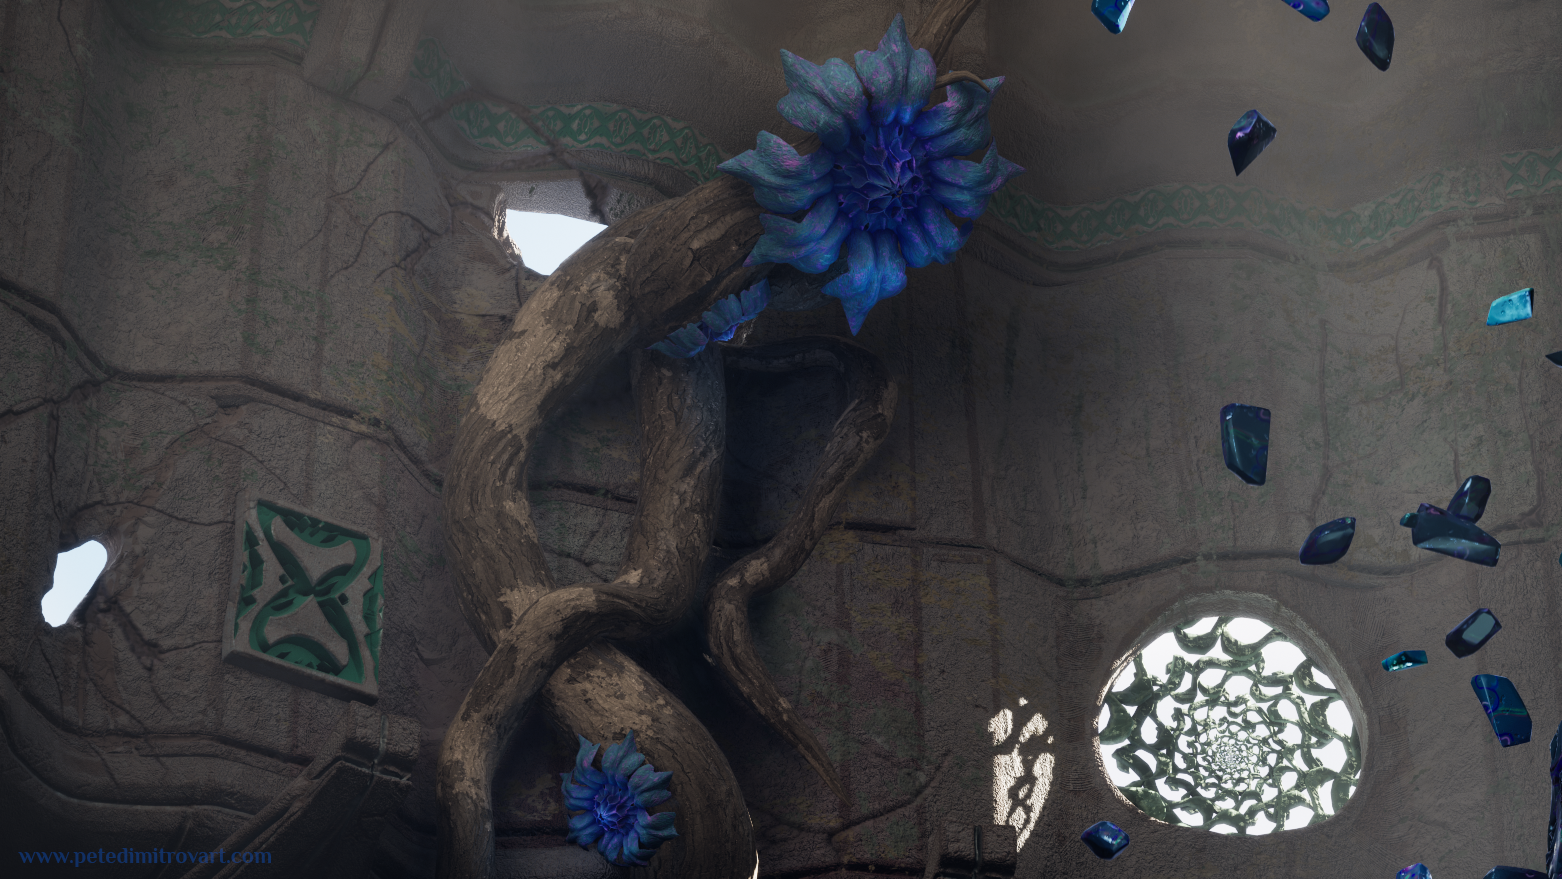 Another beauty shot that now looks upwards to the ceiling where a root system has broken through the walls. From it grows one of the largest petals in the scene. It looks directly towards the crystal orb.